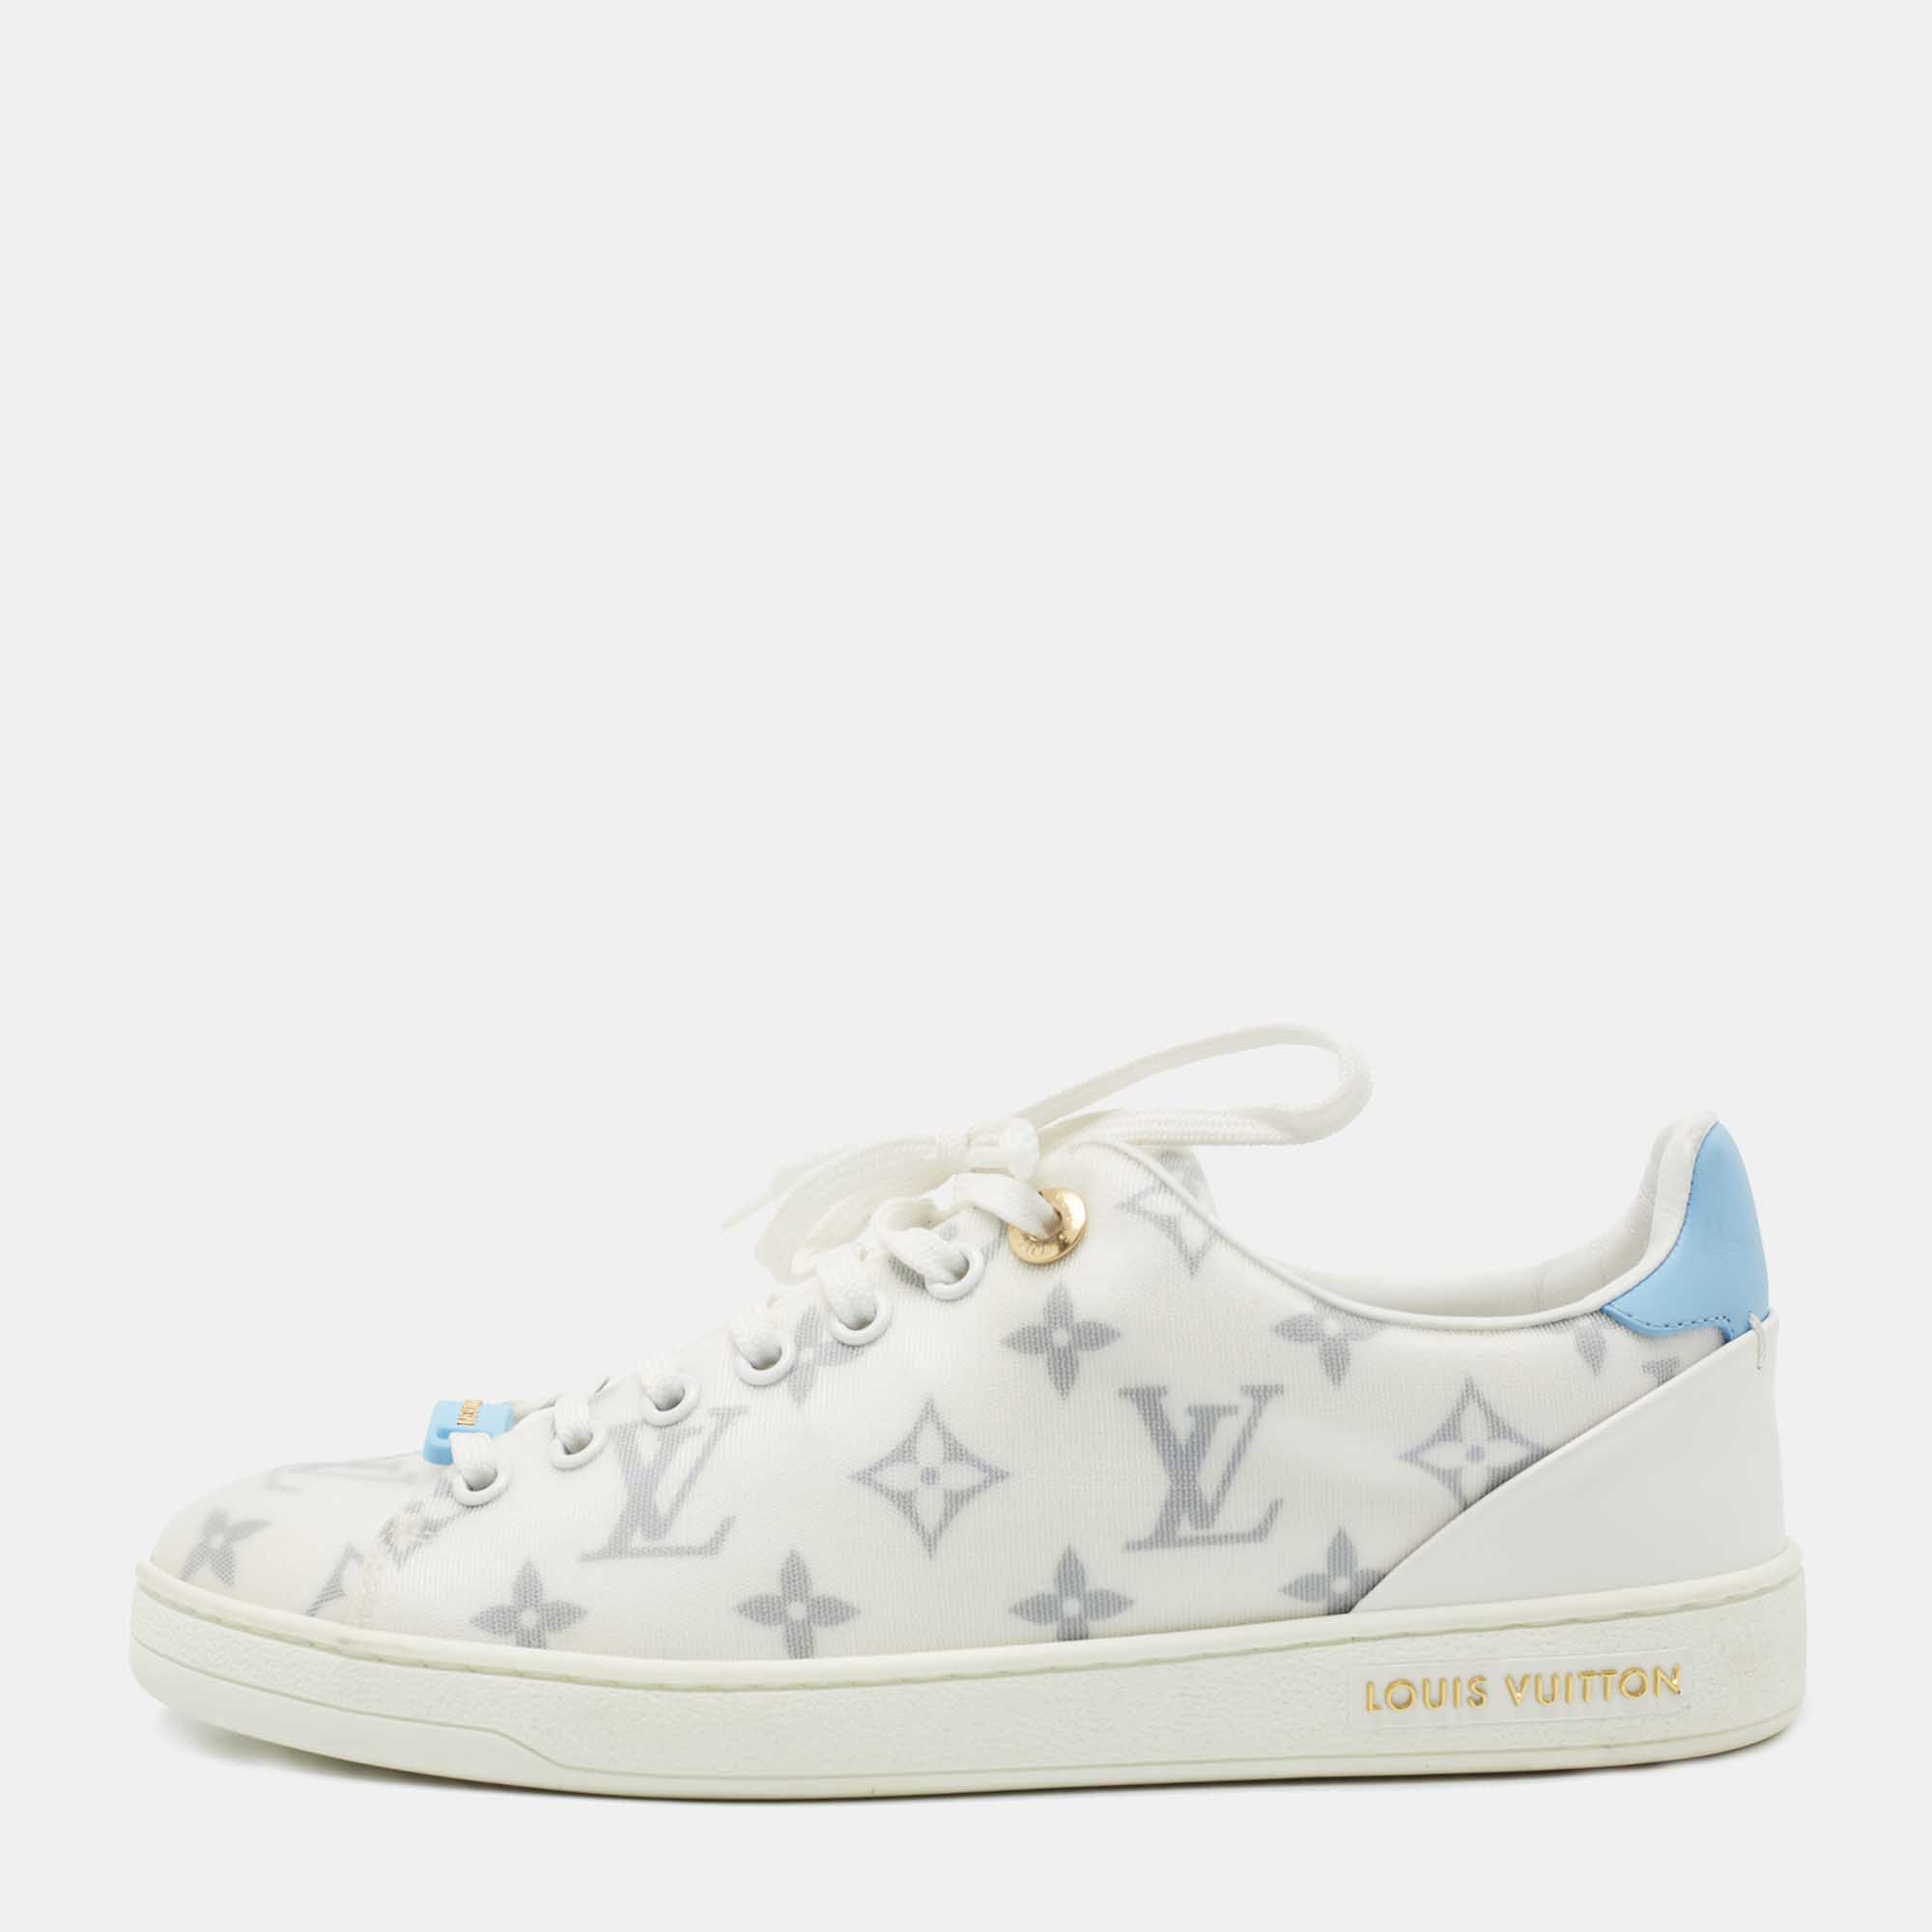 Louis Vuitton White/Blue Monogram Mesh and Leather Match Up Sneakers Size  37 Louis Vuitton